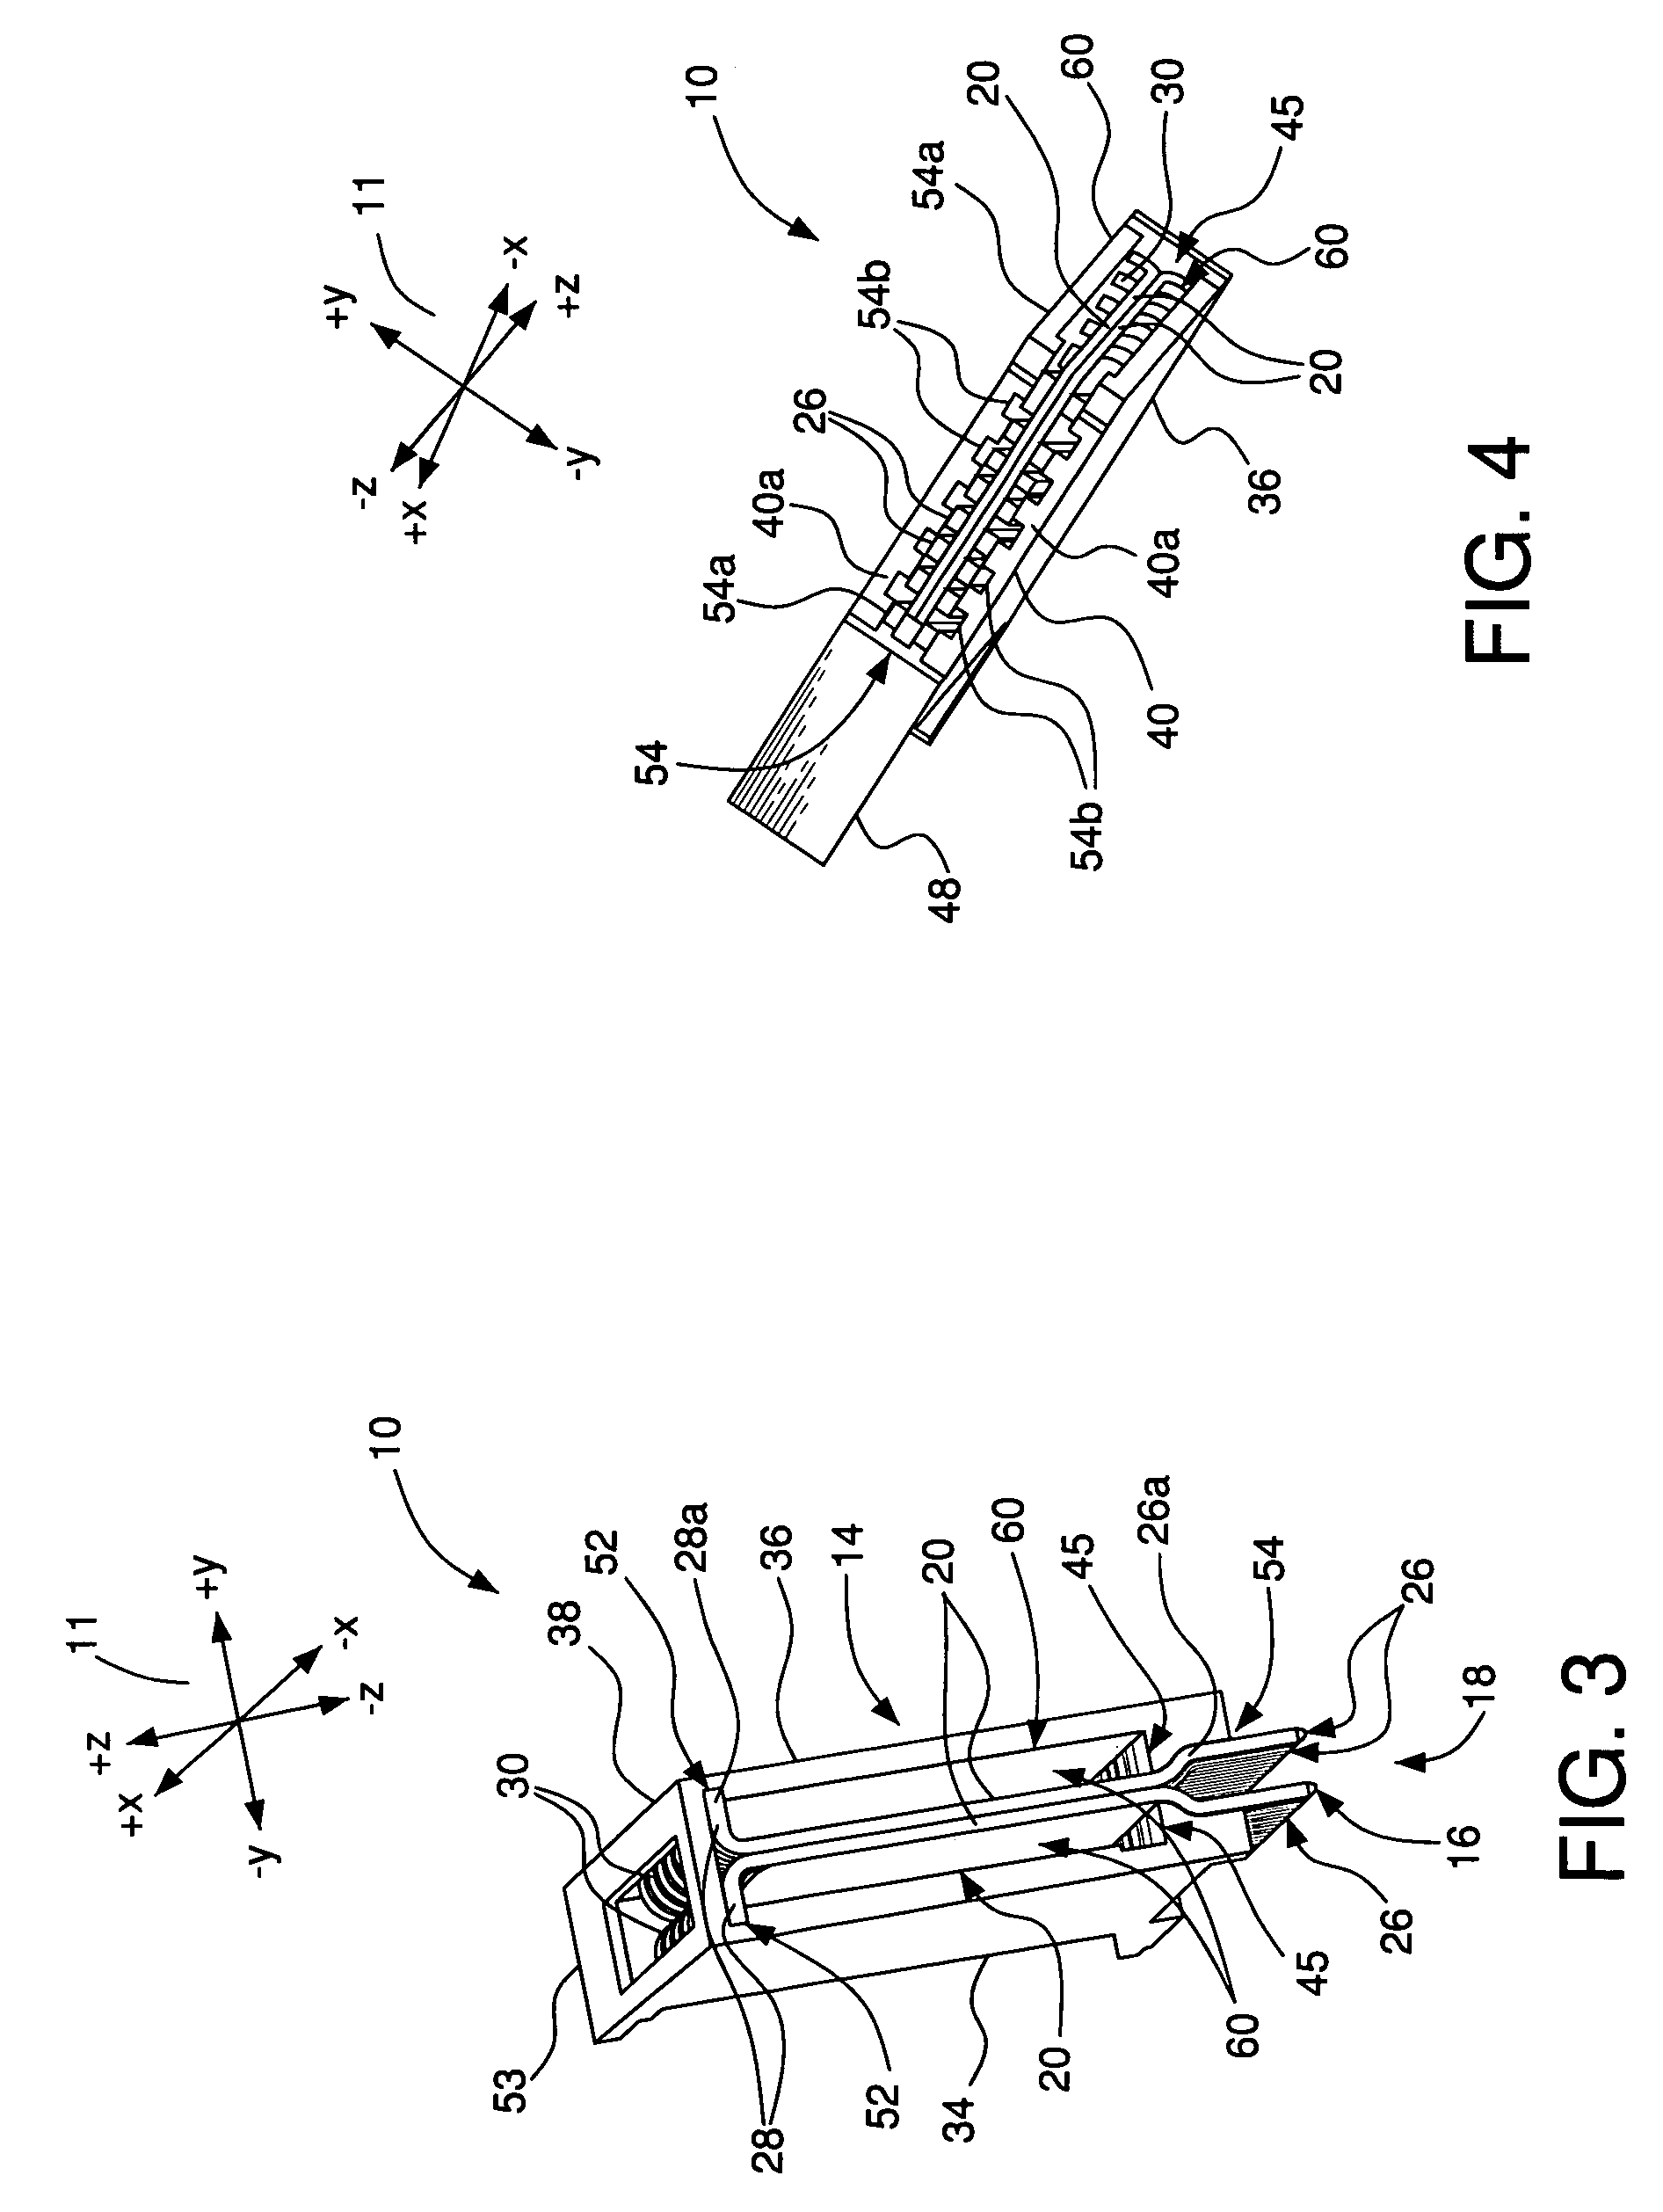 Electrical connector with air-circulation features